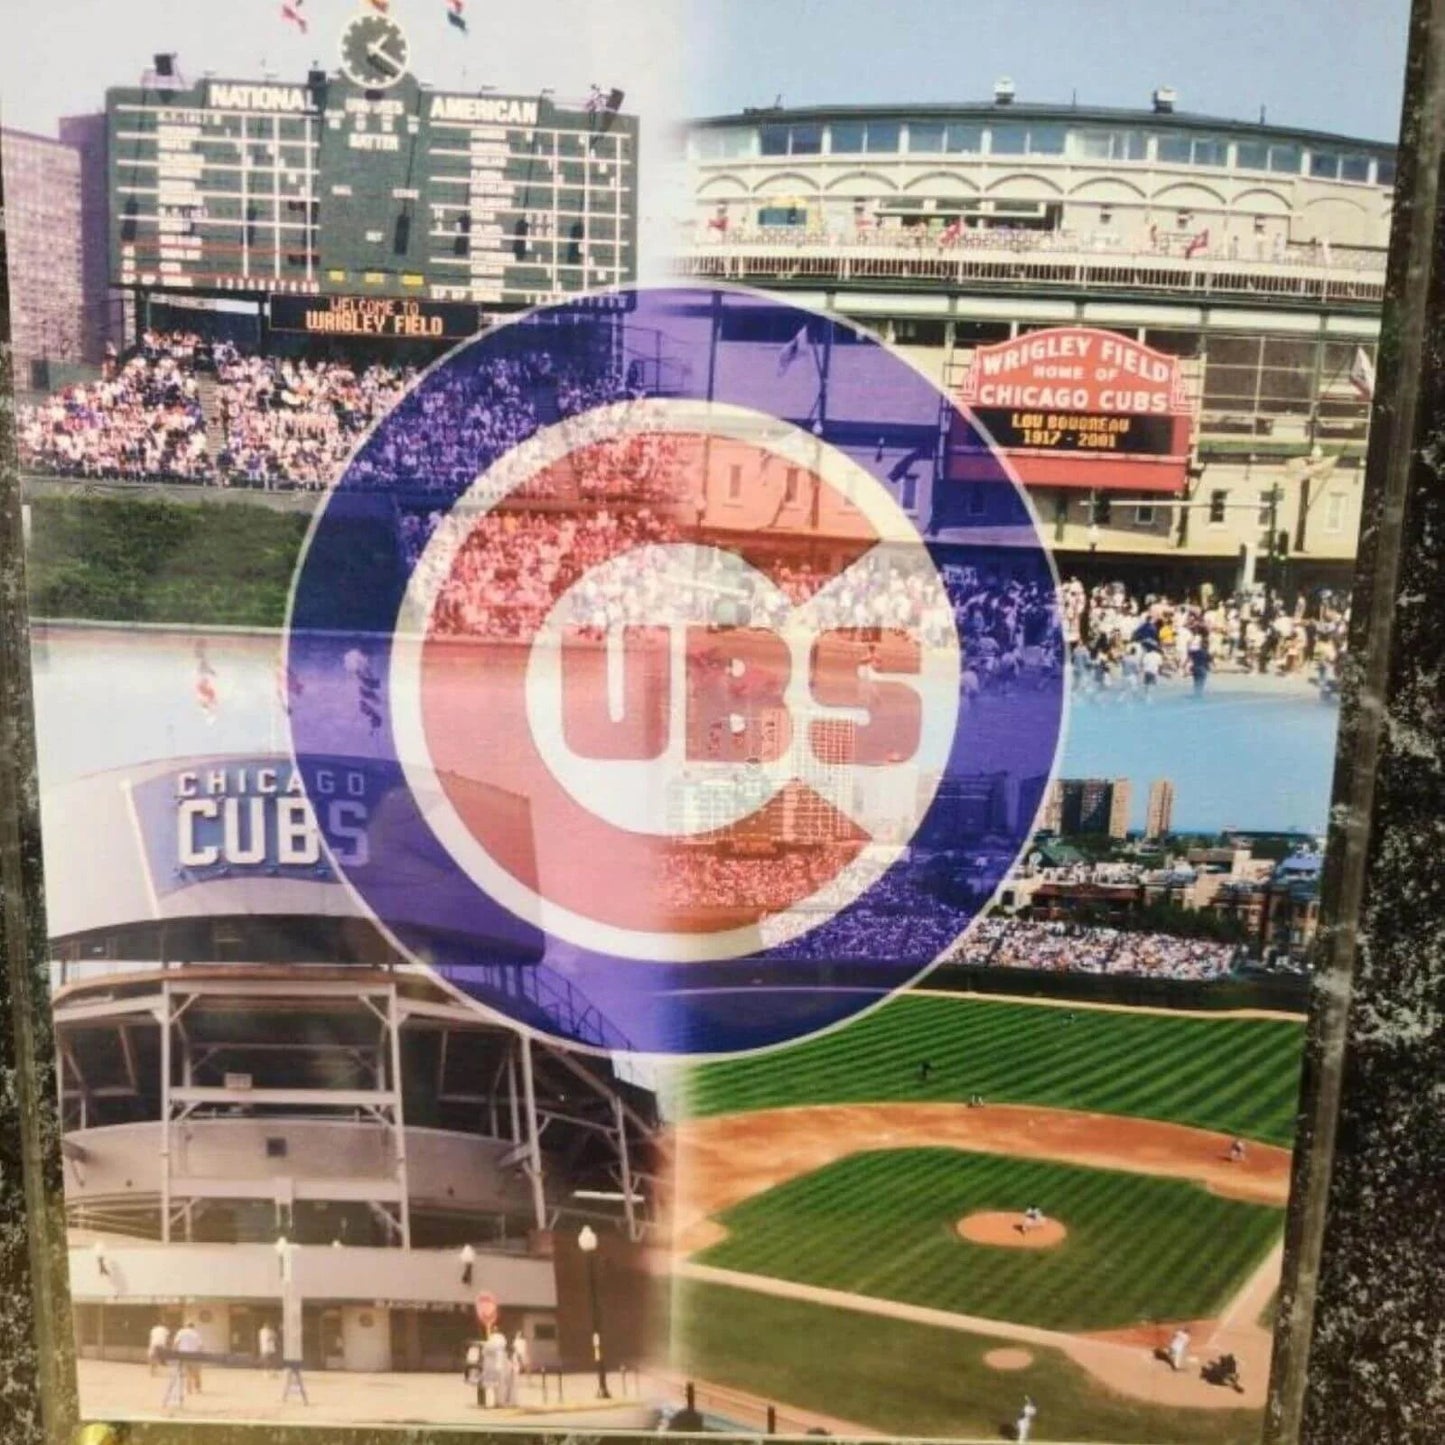 Commemorative plaque at Wrigley Field honoring the Chicago Cubs, a historic baseball team.